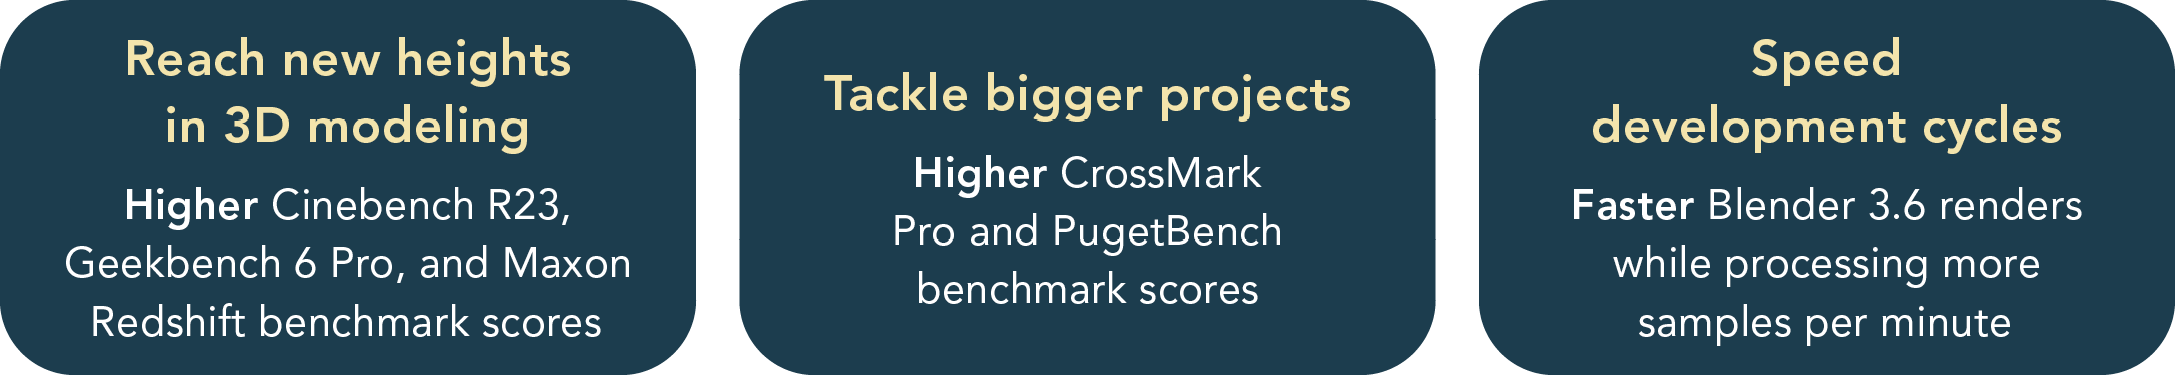 Reach new heights in 3D modeling. Higher Cinebench R23, Geekbench 6 Pro, and Mason Redshift benchmark scores. Tackle bigger projects. Higher CrossMark Pro and PugetBench benchmark scores. Speed development cycles. Faster Blender 3.6 renders while processing more samples per minute.